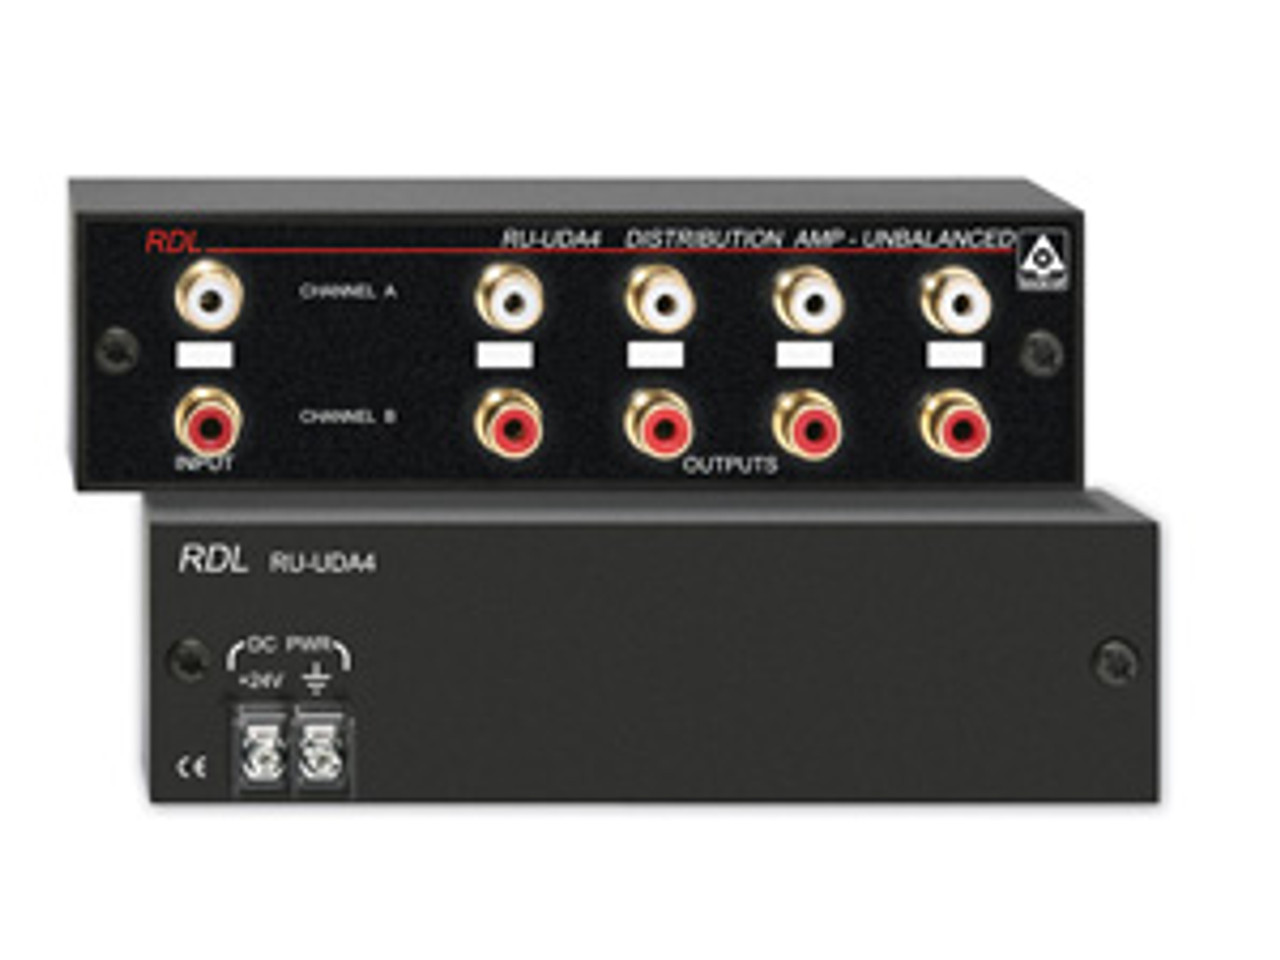  RDL RU-UDA4 Unbalanced Stereo Distribution Amplifier with Stereo or Dual Mono Inputs and 4 Outputs Per Input - RCA Connectors (RU-UDA4)